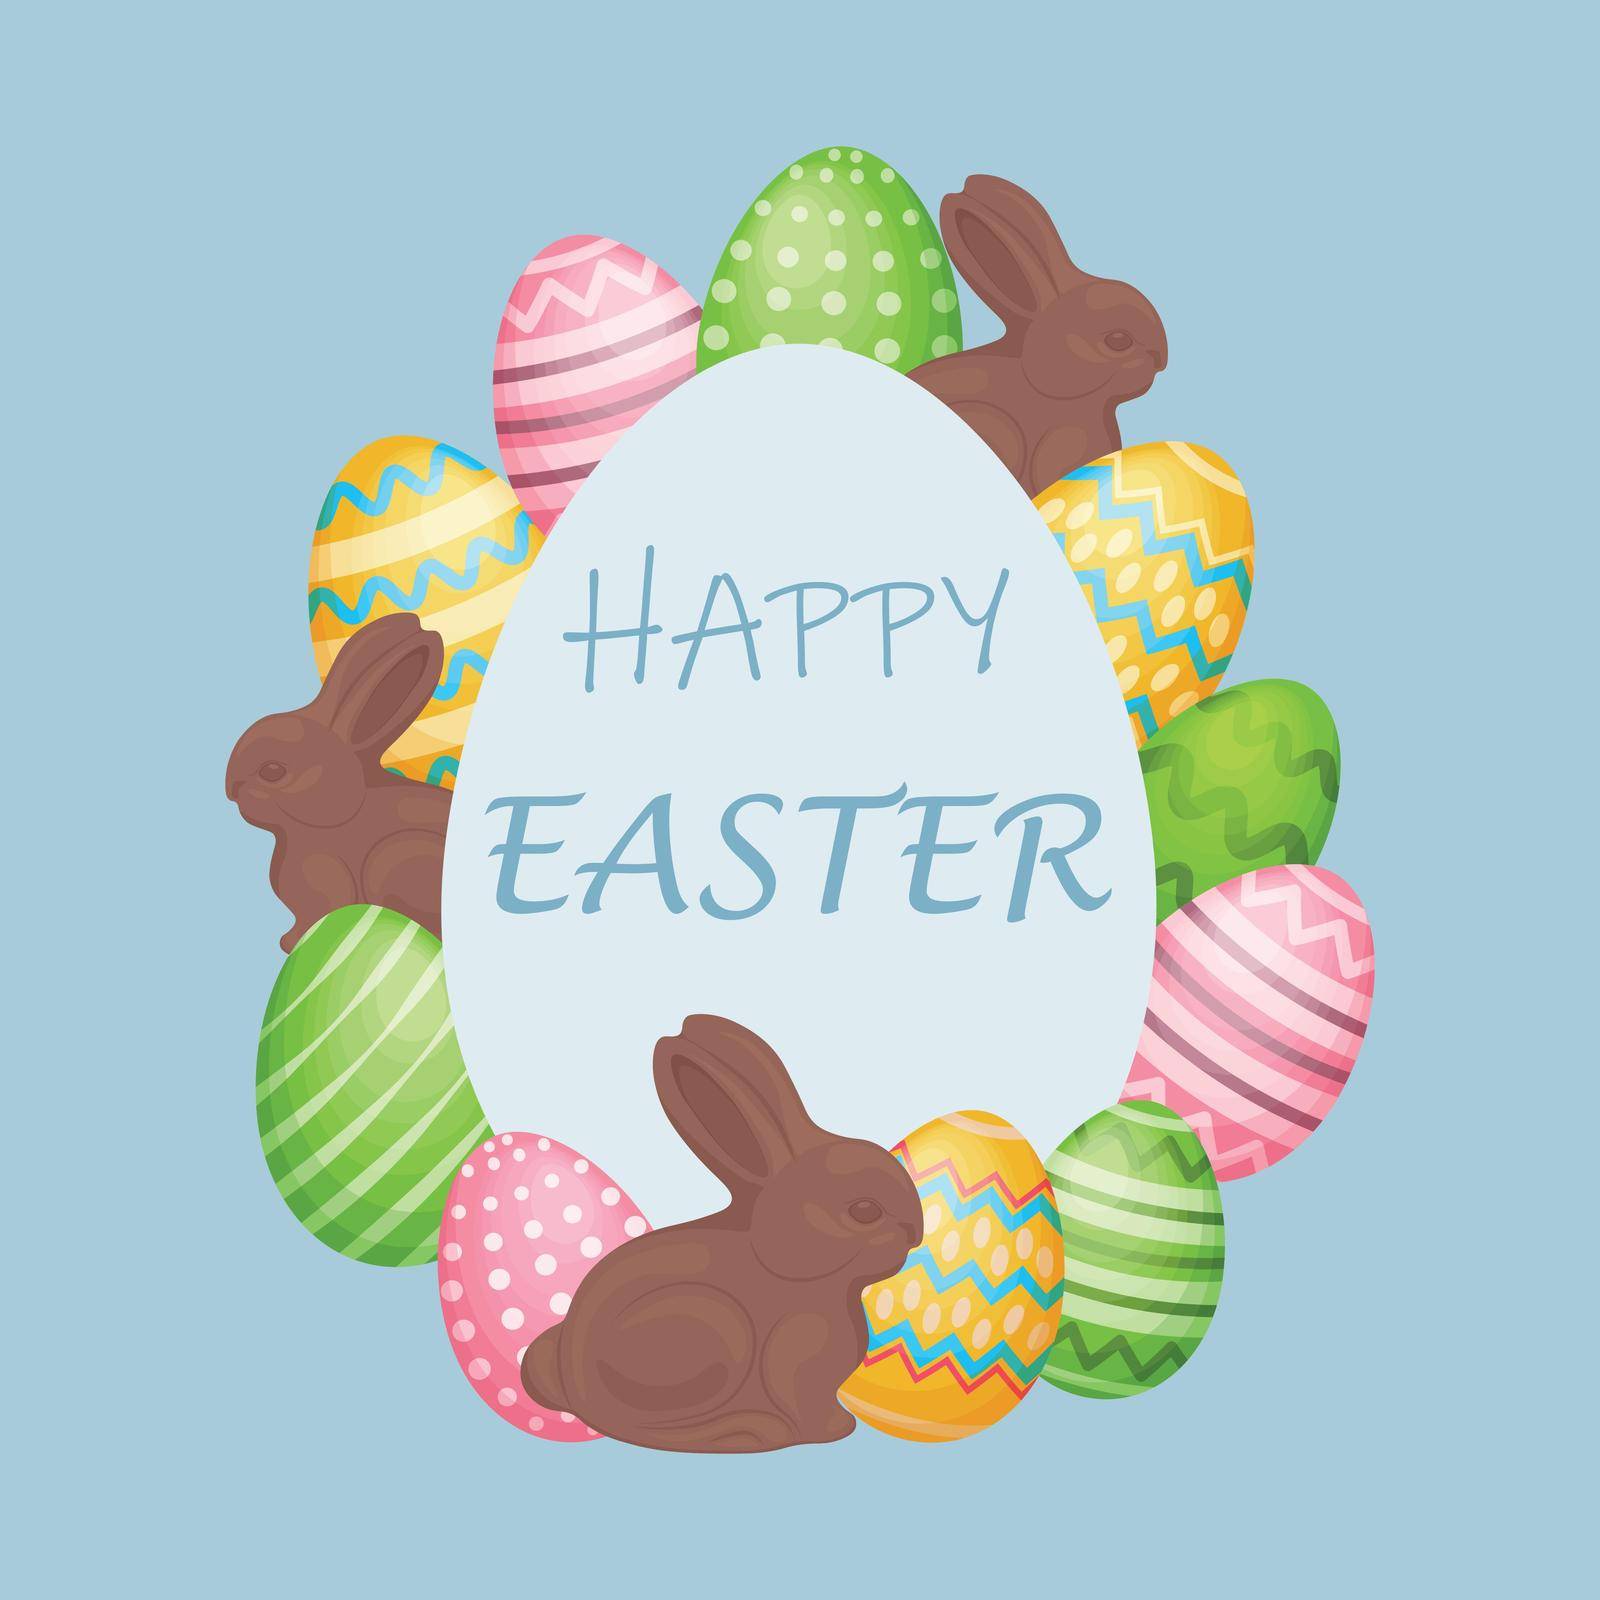 Happy Easter. Greeting card with an image of an Easter bunny and colored Easter eggs on a blue background. Vector illustration by NastyaN